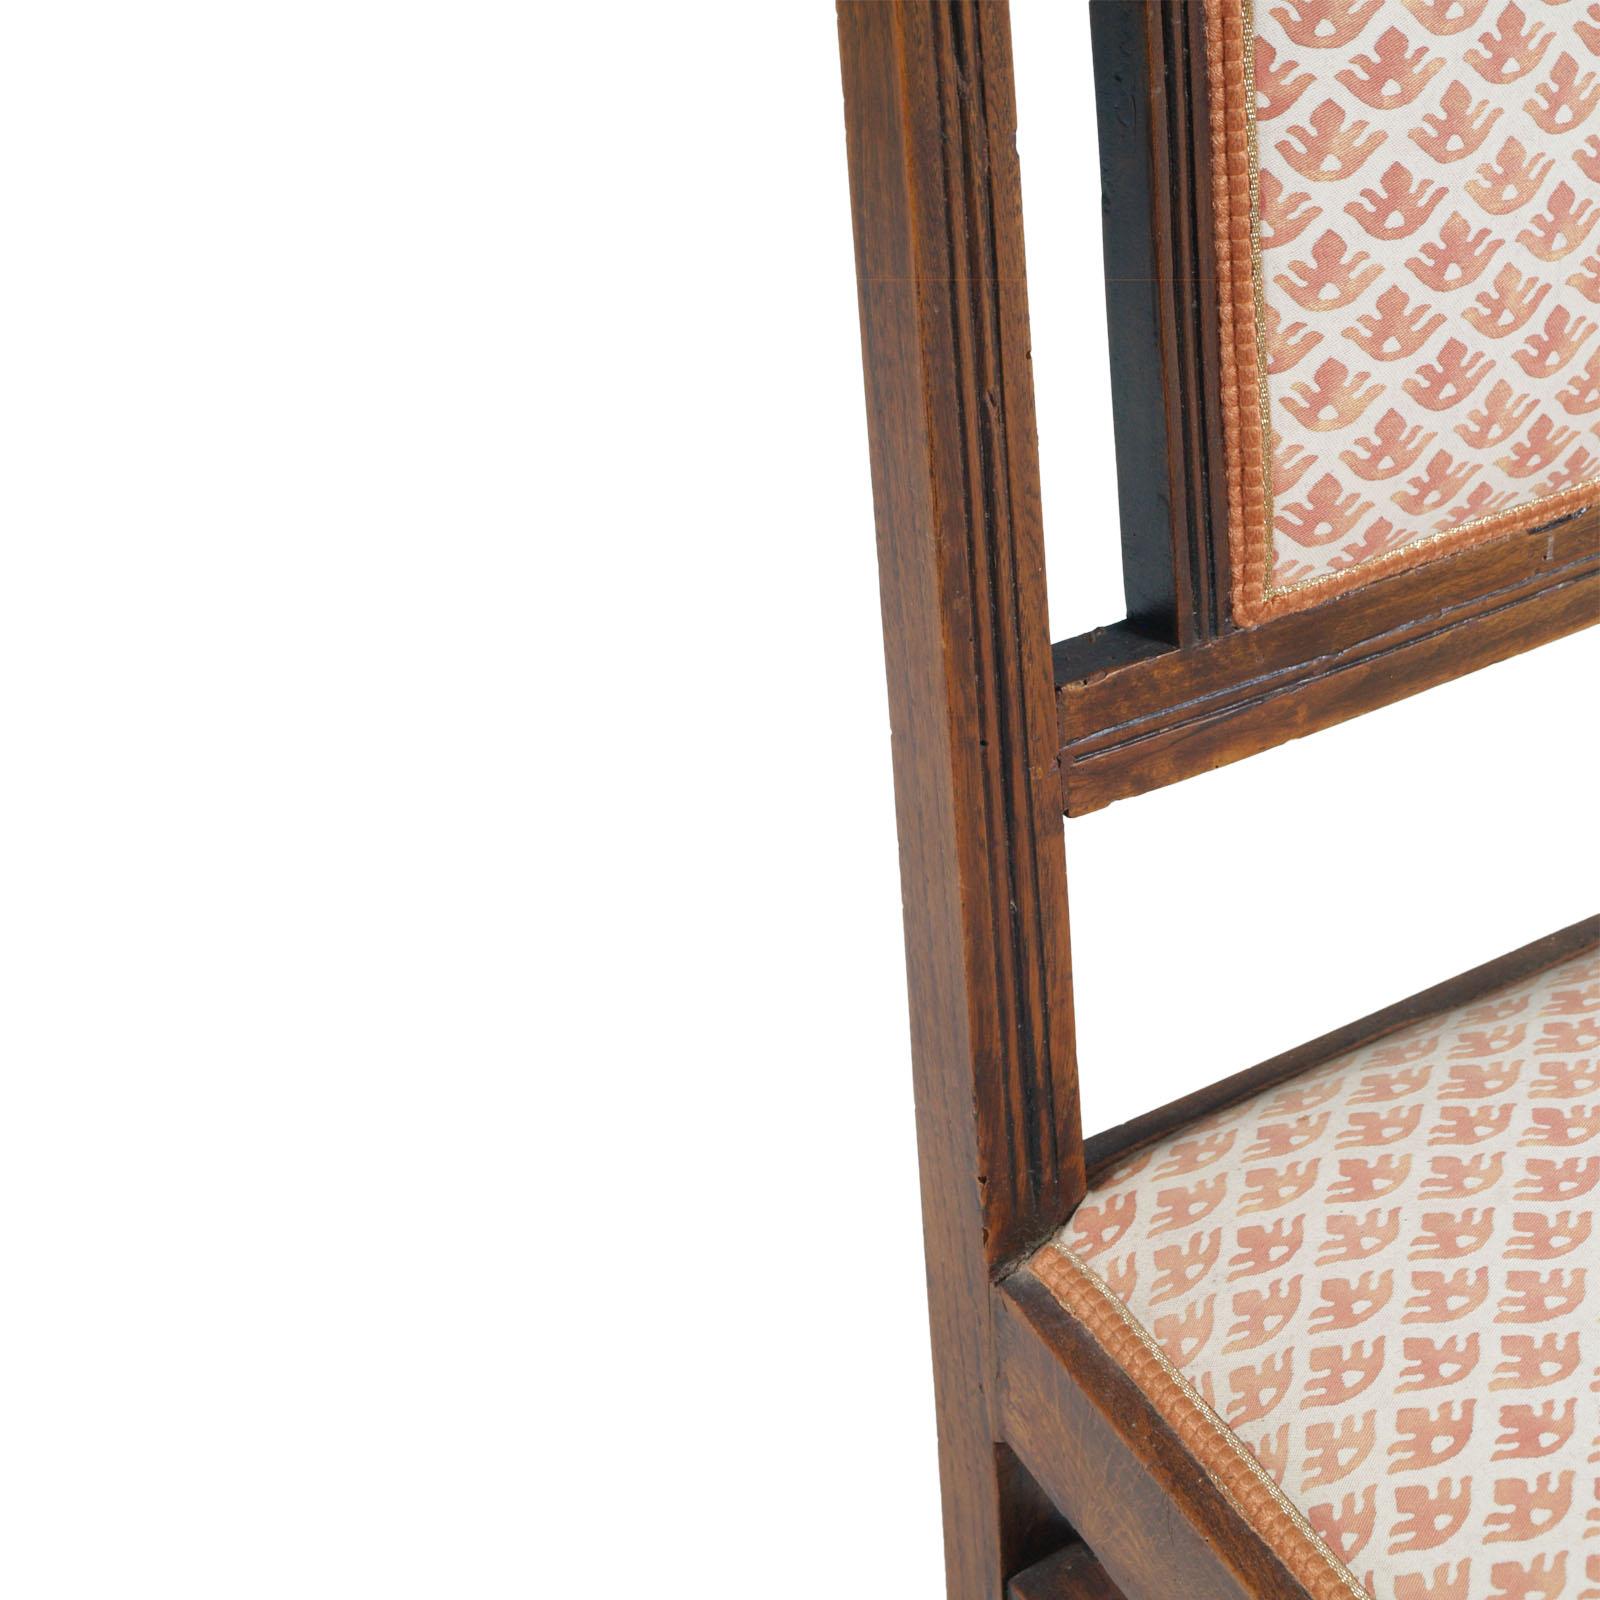 Early 20th Century Set of Four Chairs Art Nouveau in Walnut, Original Upholstery For Sale 3